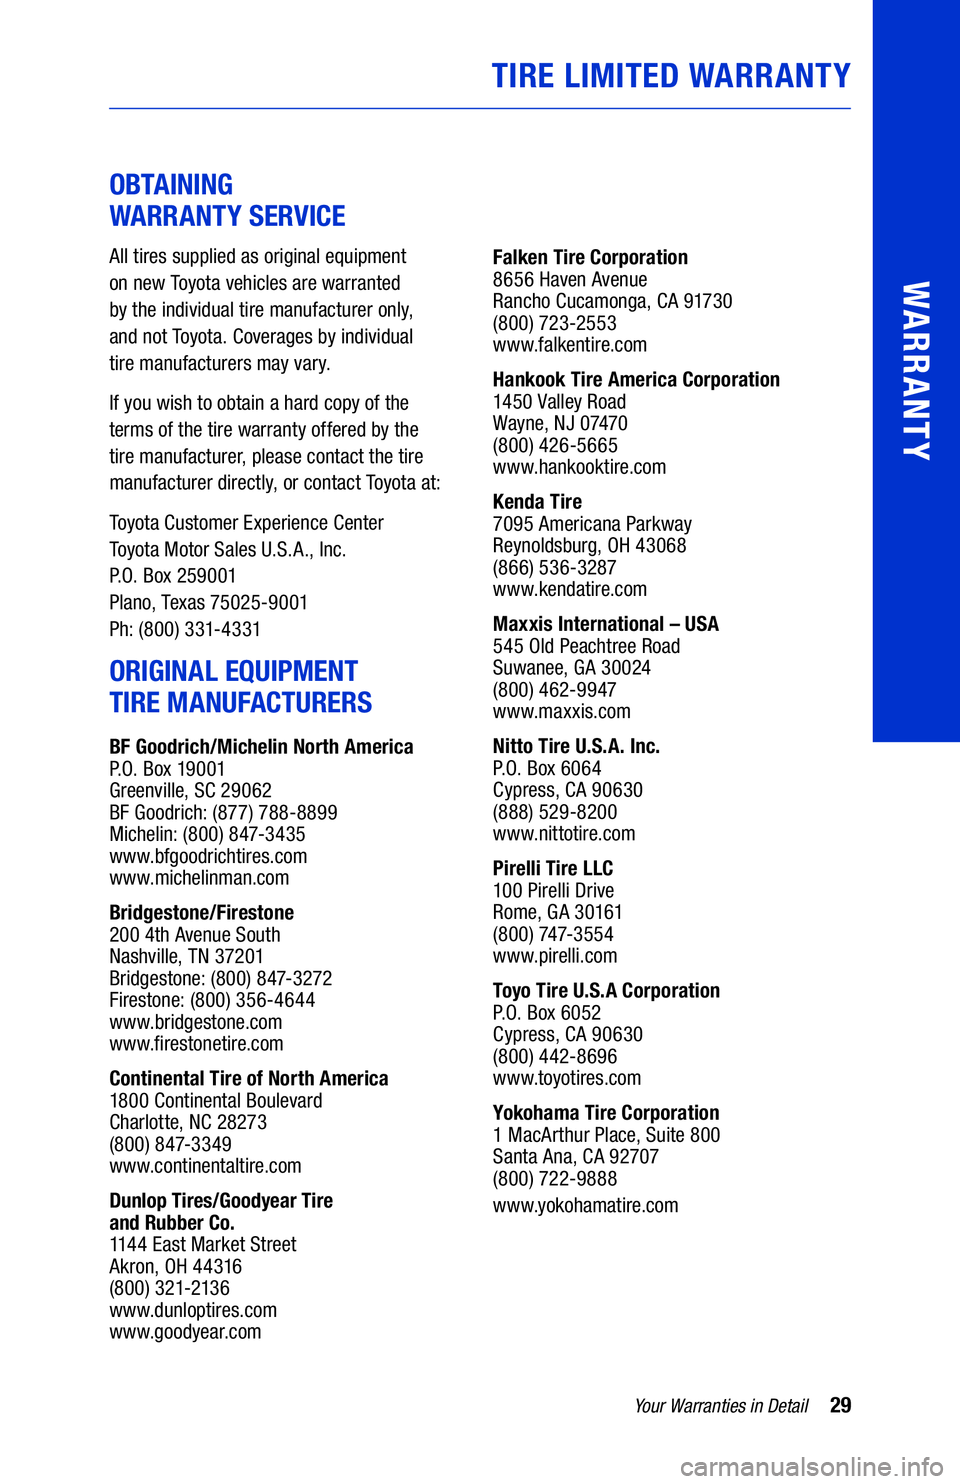 TOYOTA 4RUNNER 2021  Warranties & Maintenance Guides (in English) 29Your Warranties in Detail
WARRANTY
OBTAINING  
WARRANTY SERVICE
All tires supplied as original equipment  
on new Toyota vehicles are warranted  
by the individual tire manufacturer only,   
and not